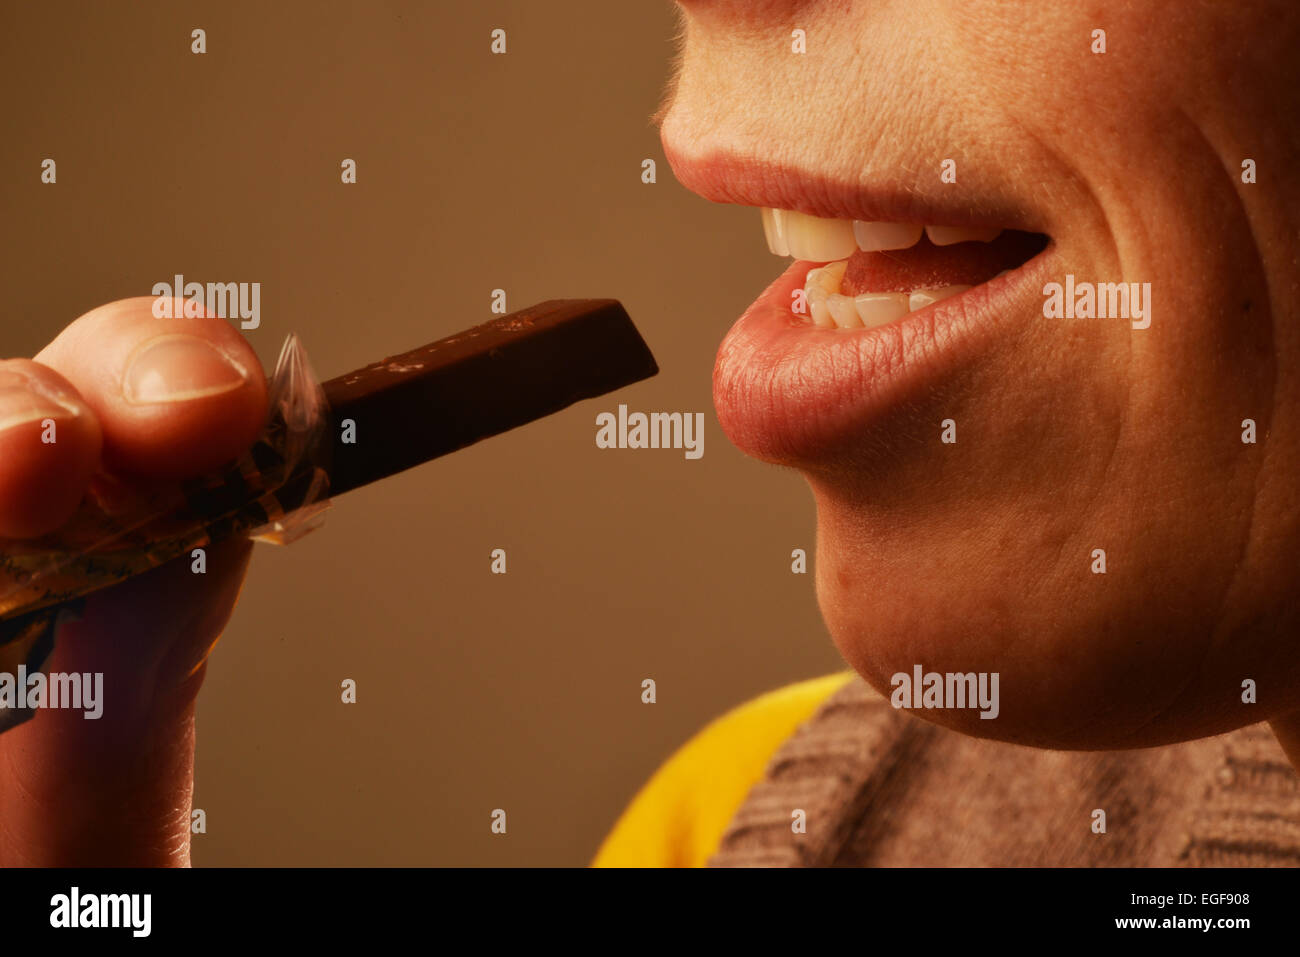 Symbolic picture about sugar in foods: Woman eating chocolate. Stock Photo